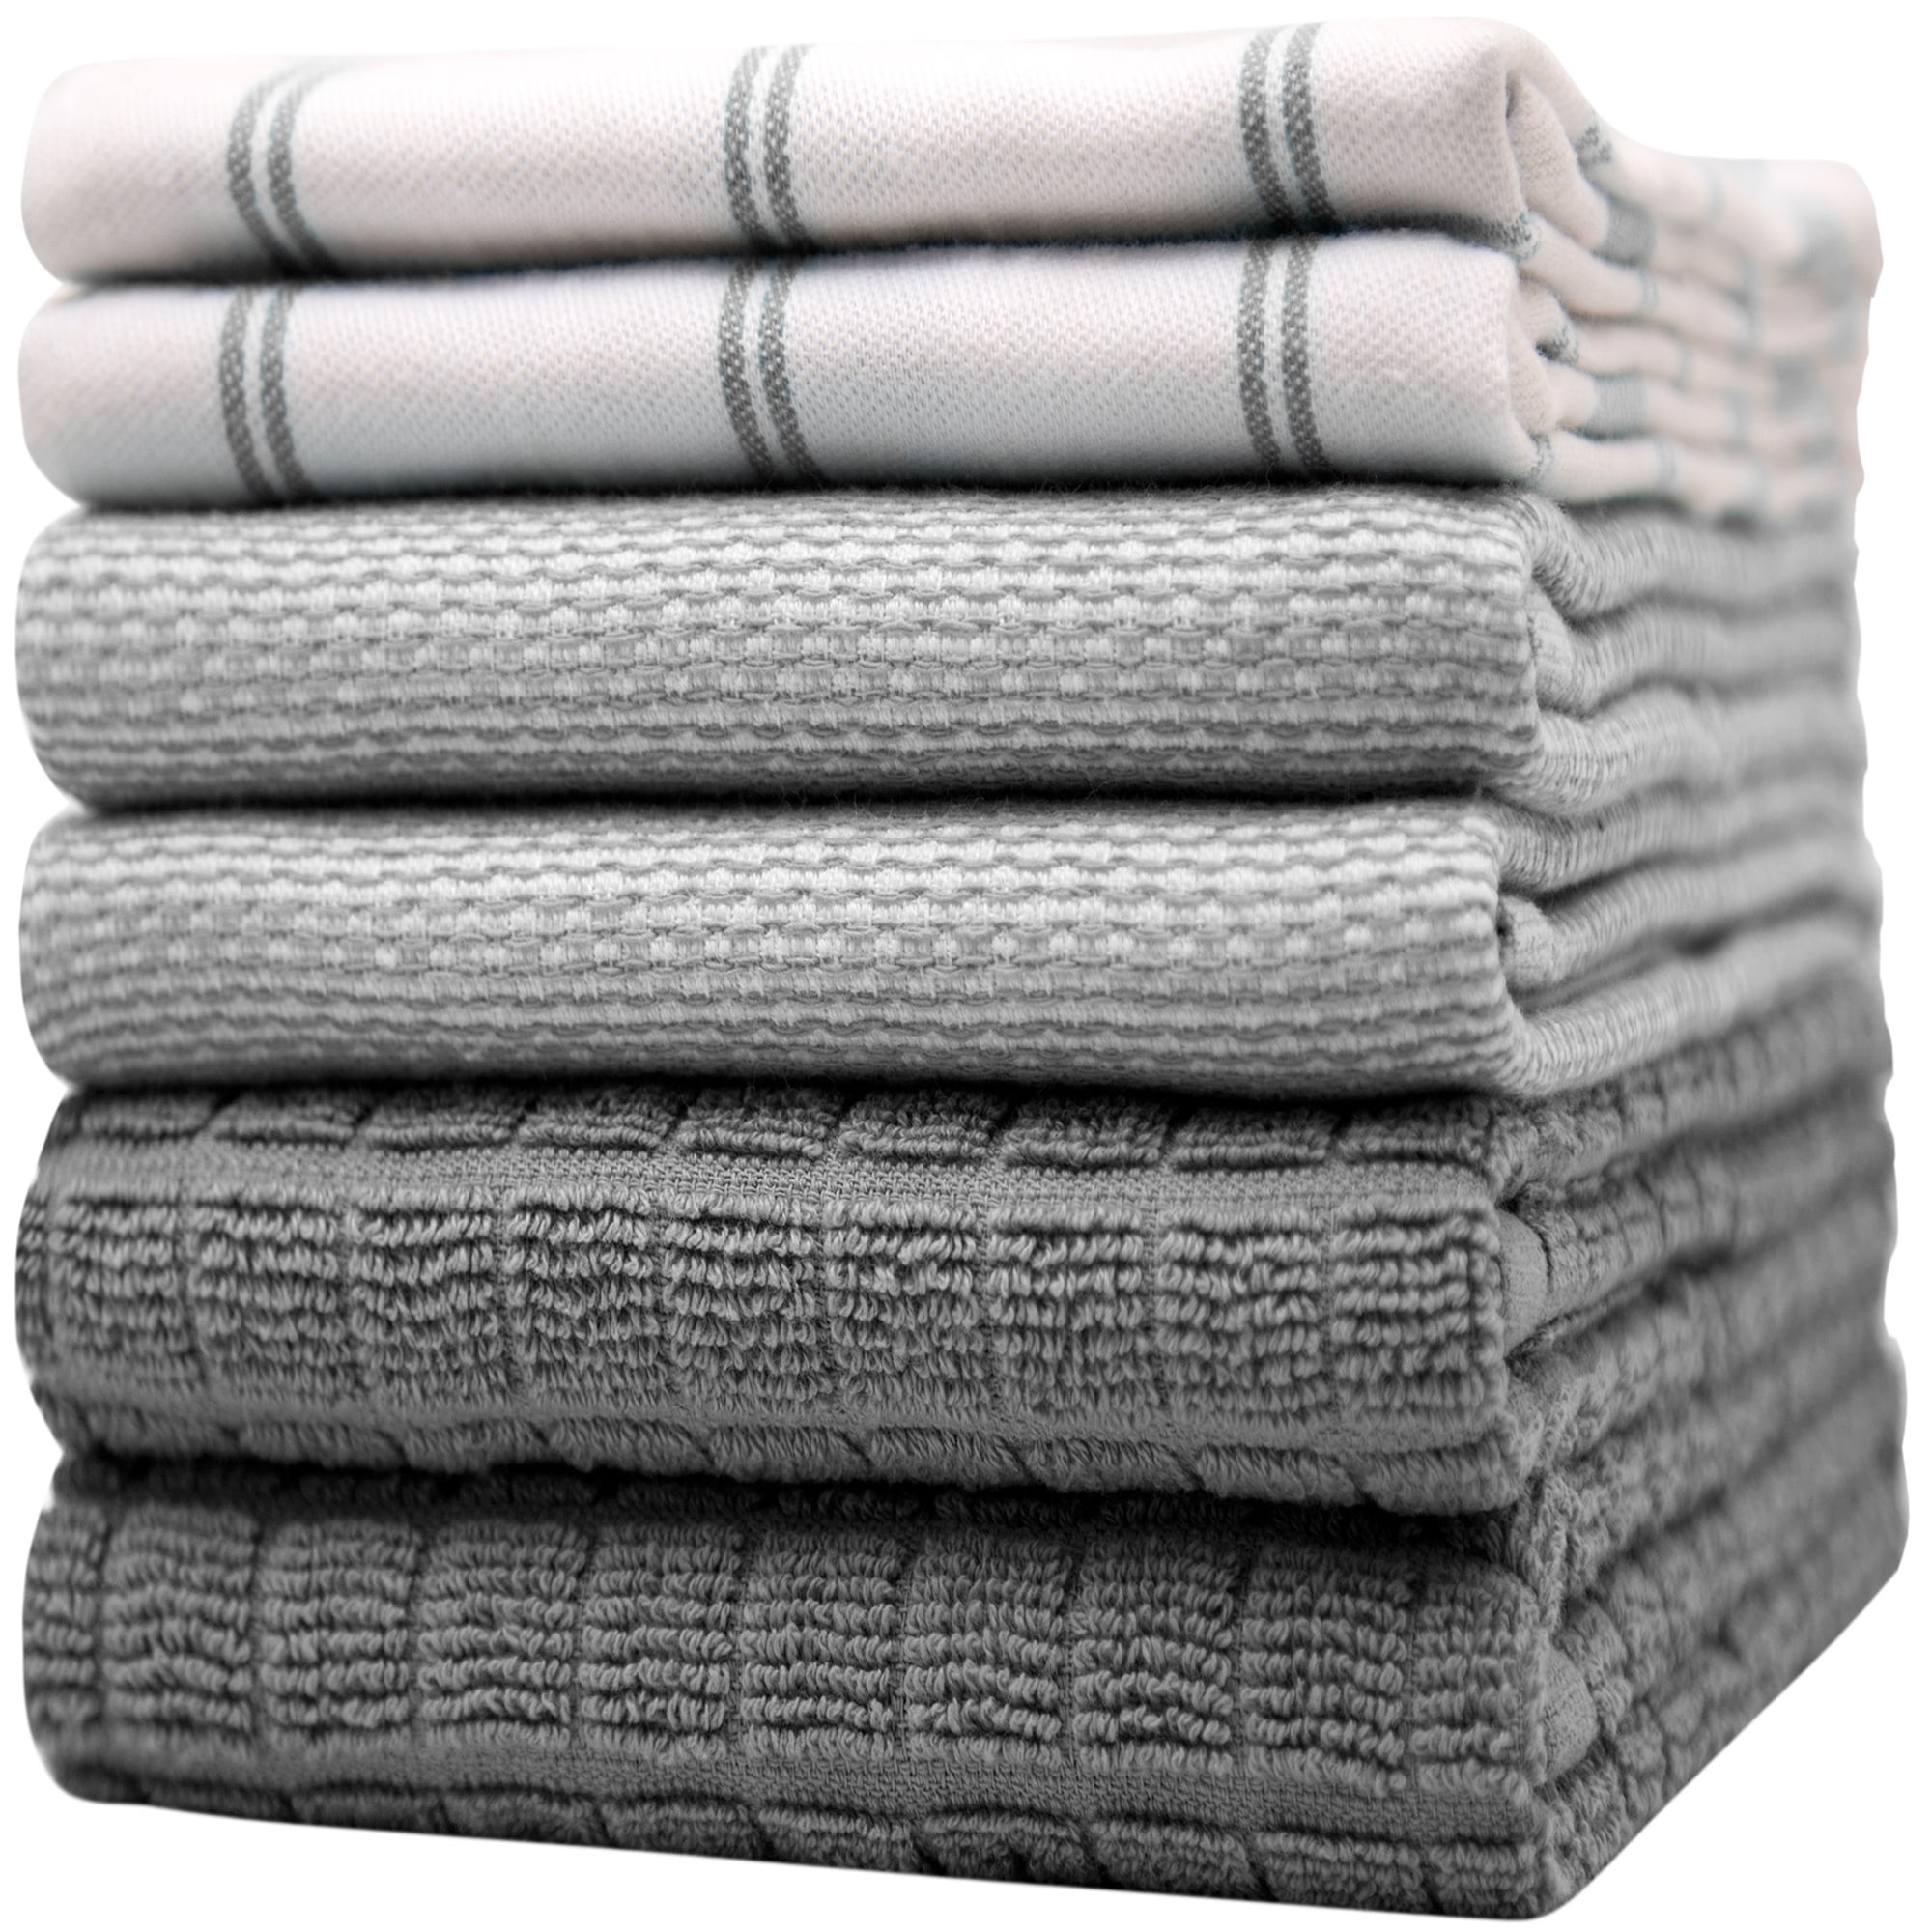 GREY Details about   ALWAYS FIRST Handy Towels Kitchen Towels 4 Towels 